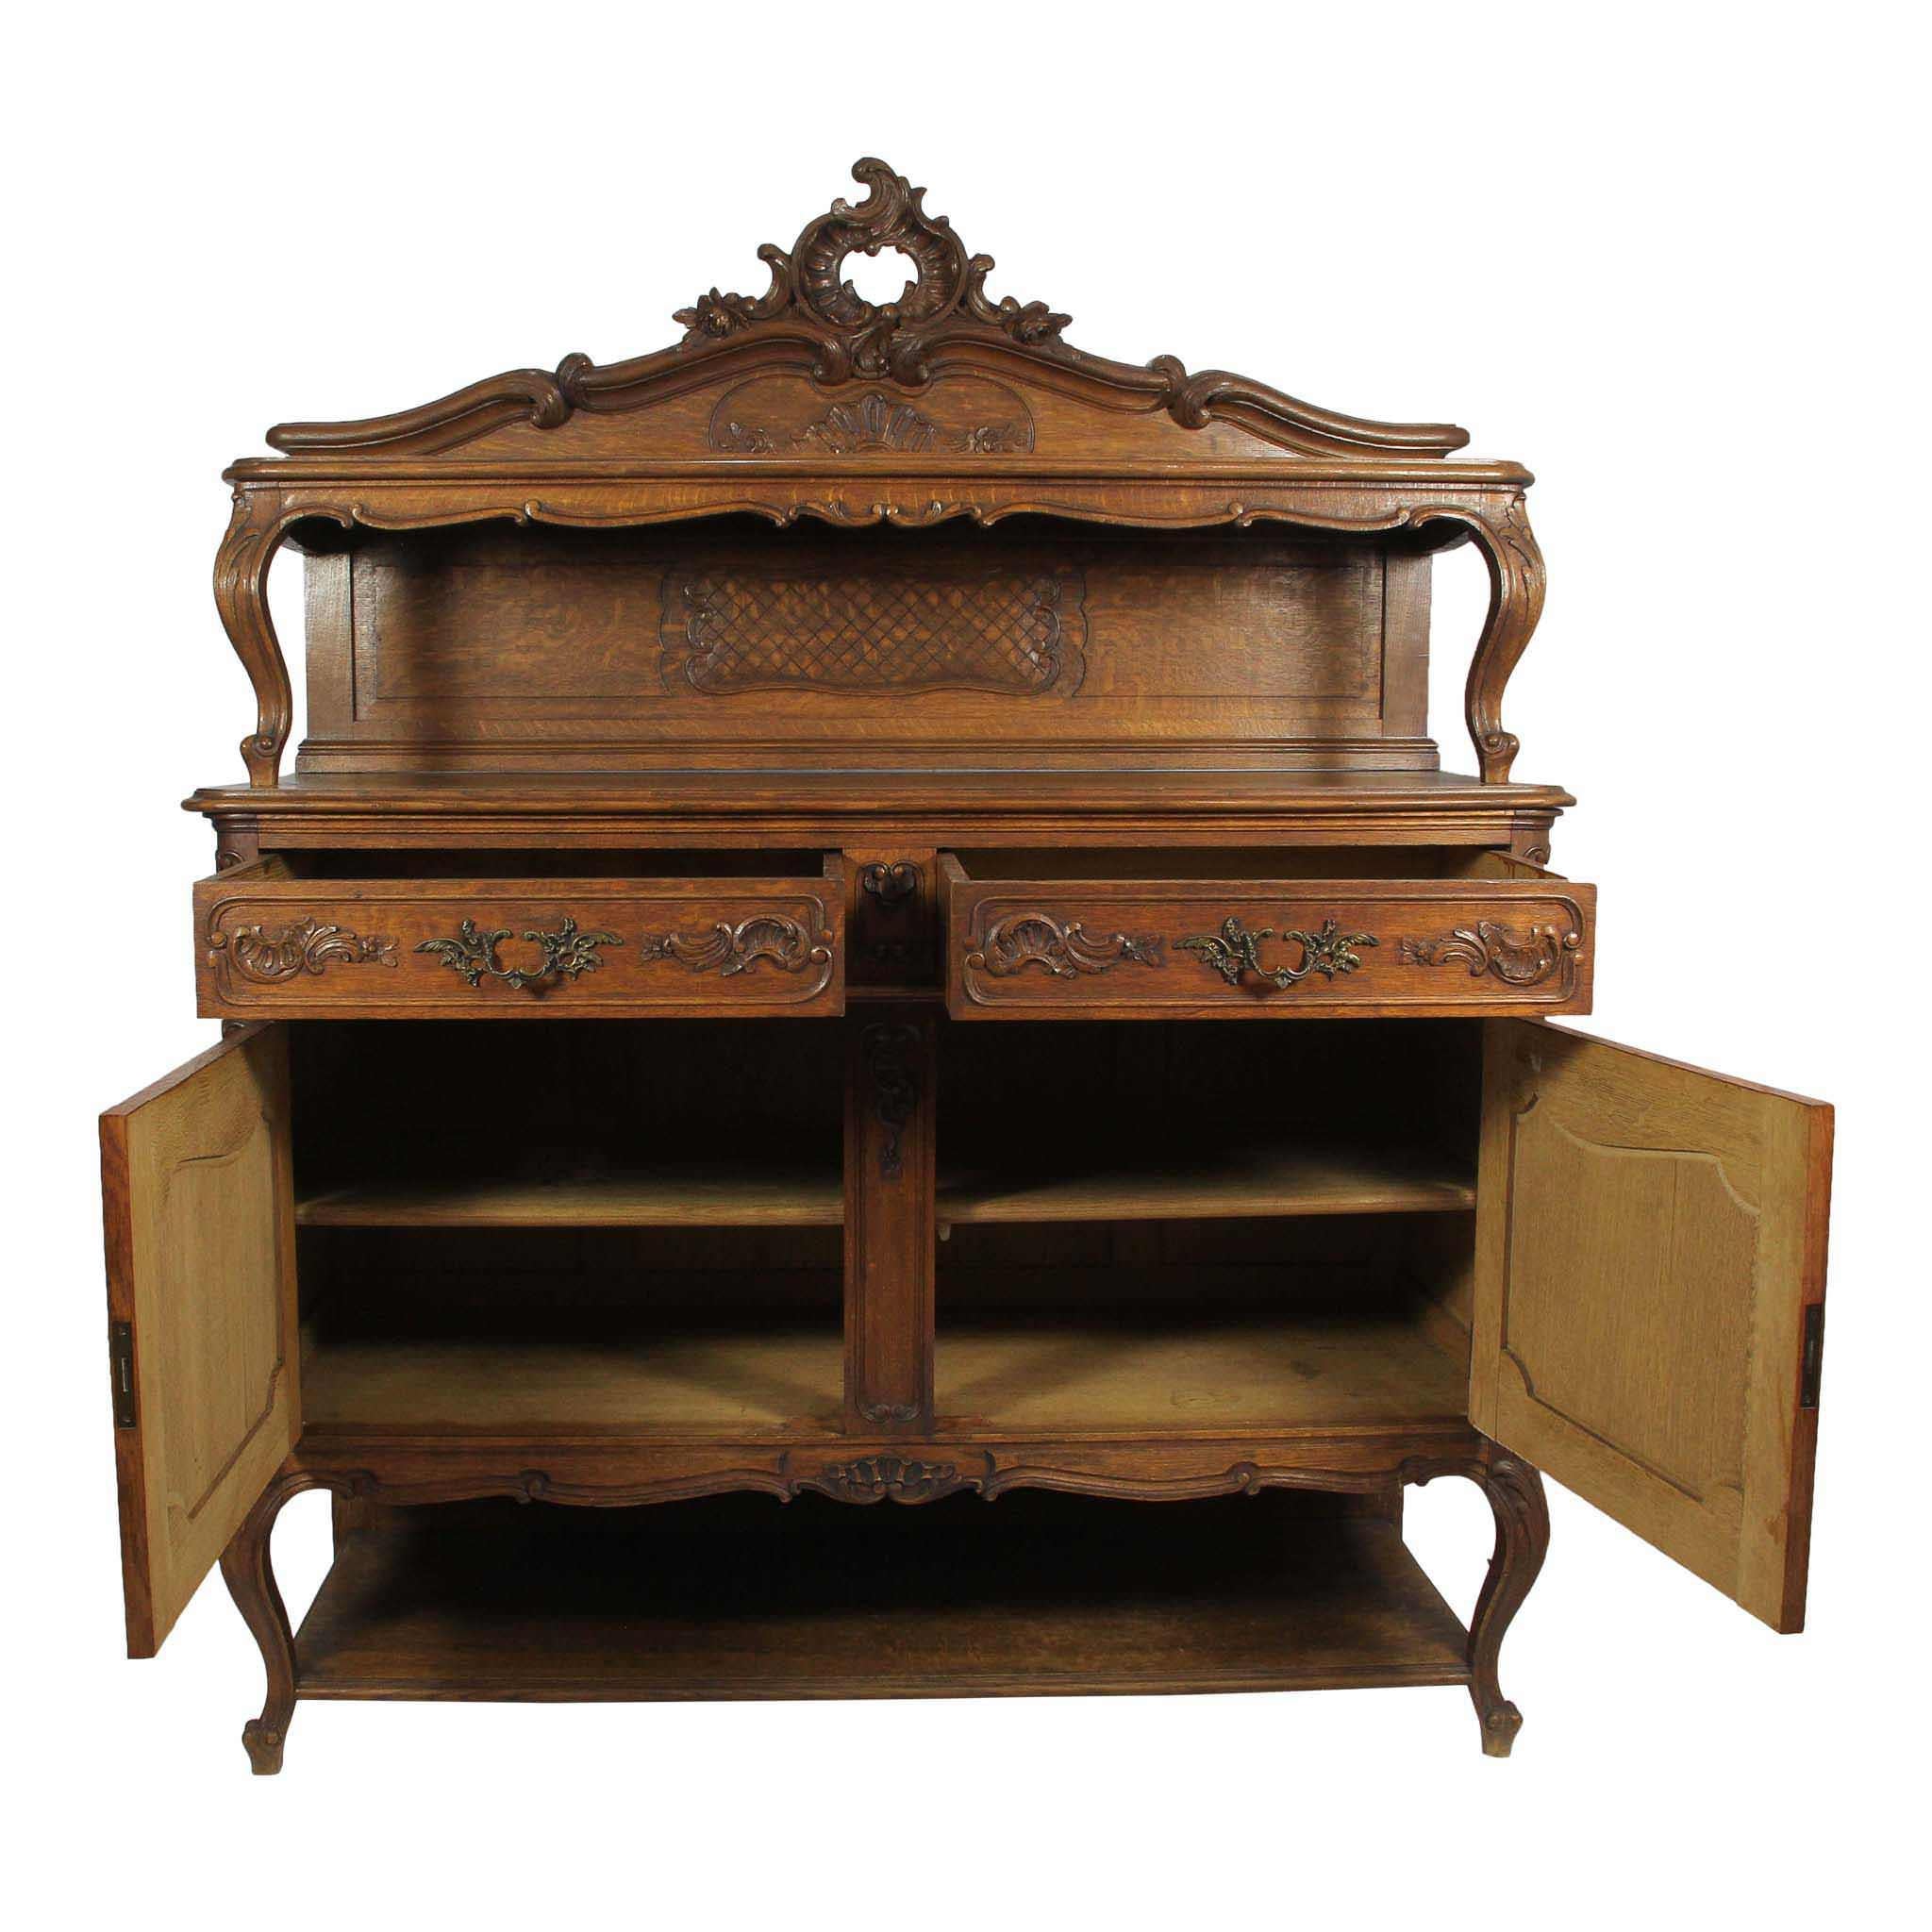 The focal point of this carved, Louis XV, oak sideboard is the backboard, which culminates in a beautiful wreath flanked by C scrolls and roses. Raised on cabriole risers and legs with acanthus leaves at the knees and whorl feet, the risers and legs